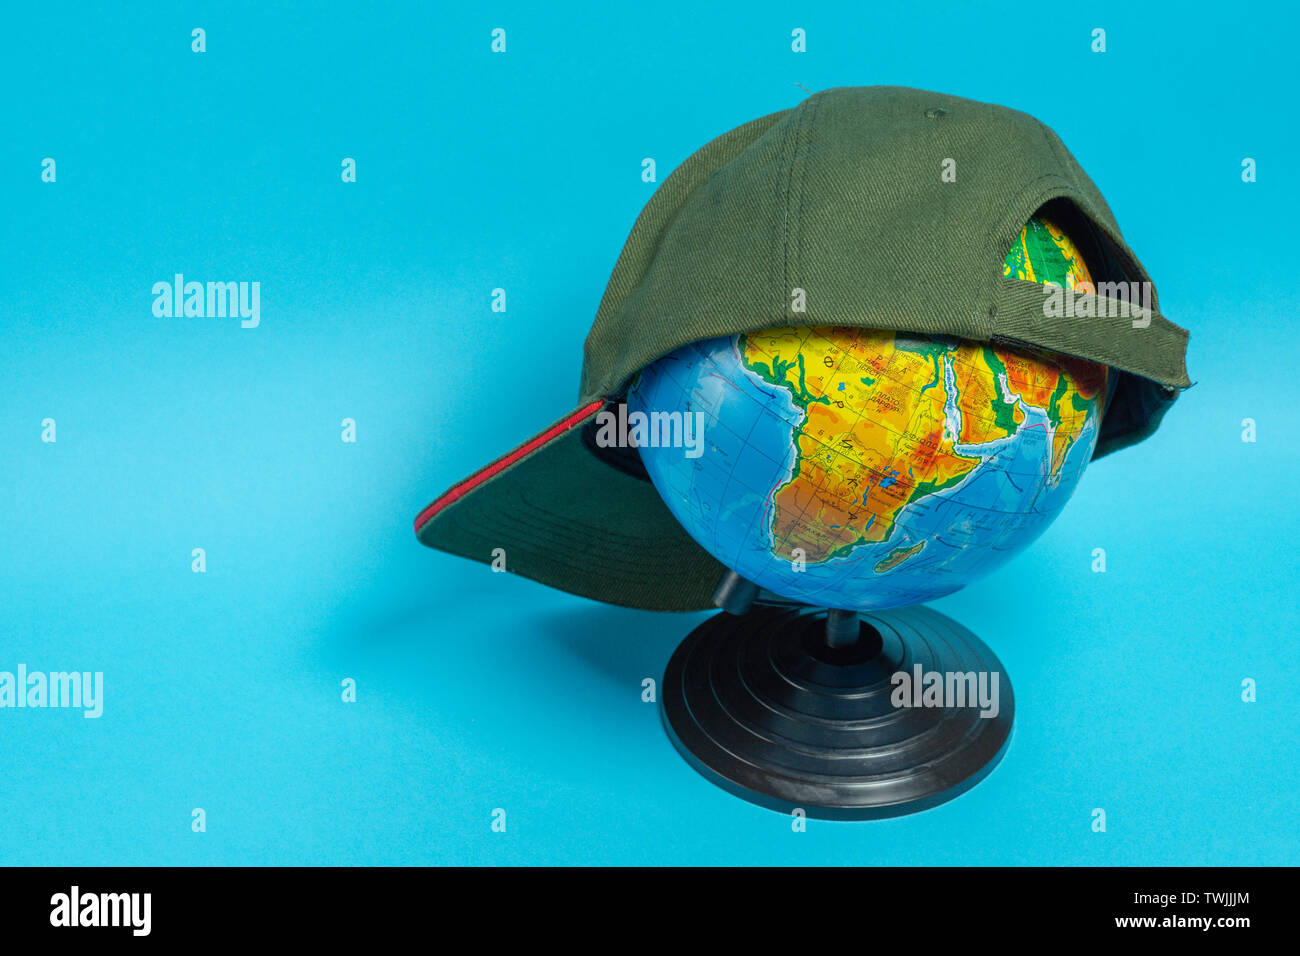 Globe with a green baseball cap on it on a blue background. Stock Photo